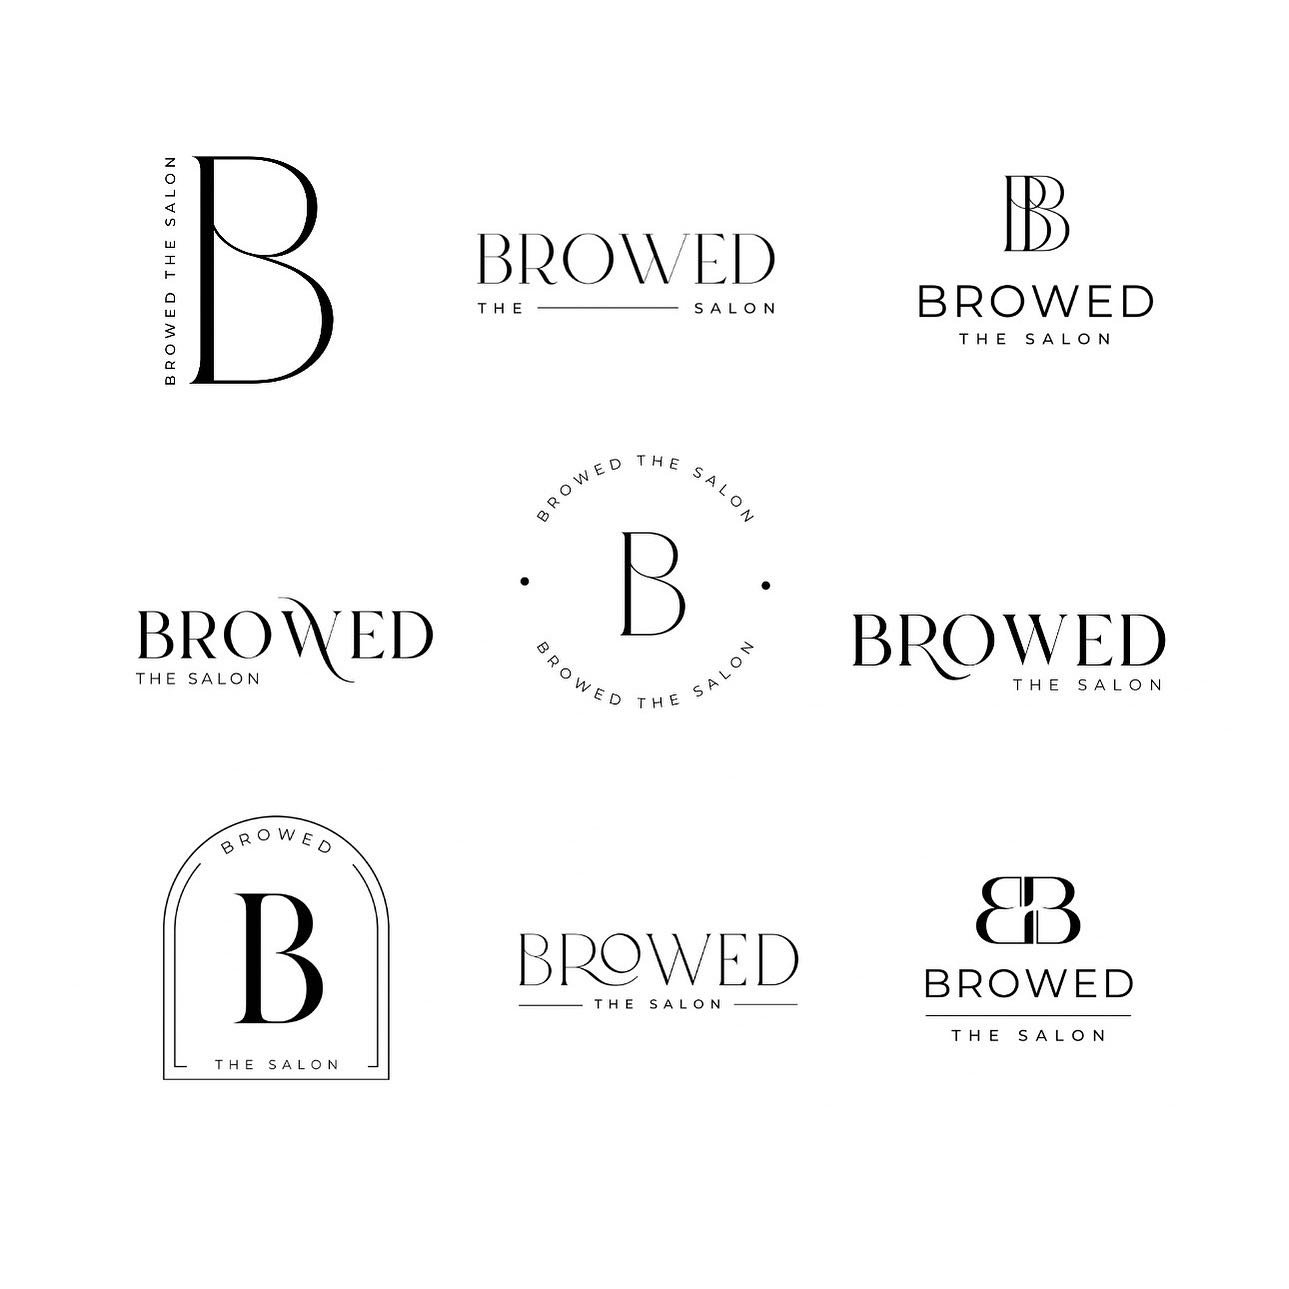 What a Logo Design refresh looks like at Social Boss! 🫶🏼✨

When you have your logo designed with Social Boss you can expect not 1, not 2, but actually 5-6 initial concepts to choose from! 🙌🏼 That means you have more variety off the bat giving you